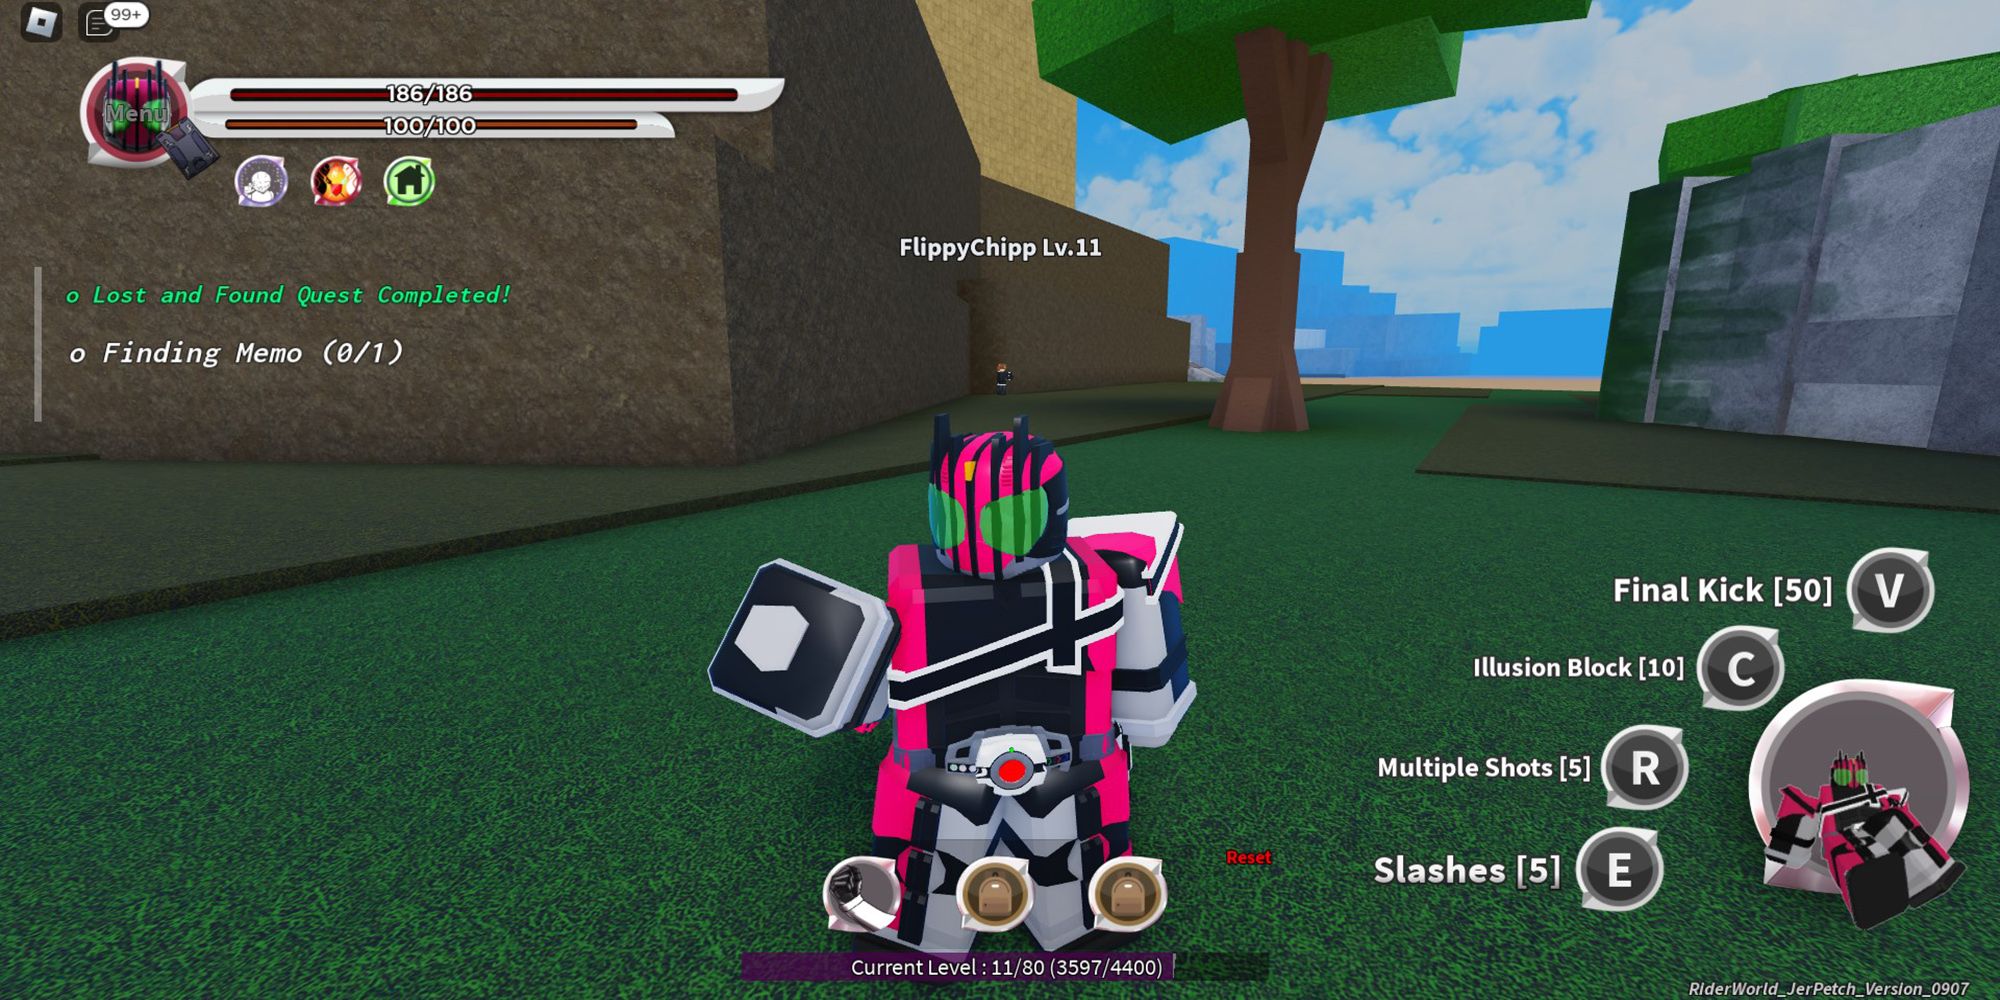 An up-and-coming armored traveler rests their stamina in the Roblox game, Rider World.